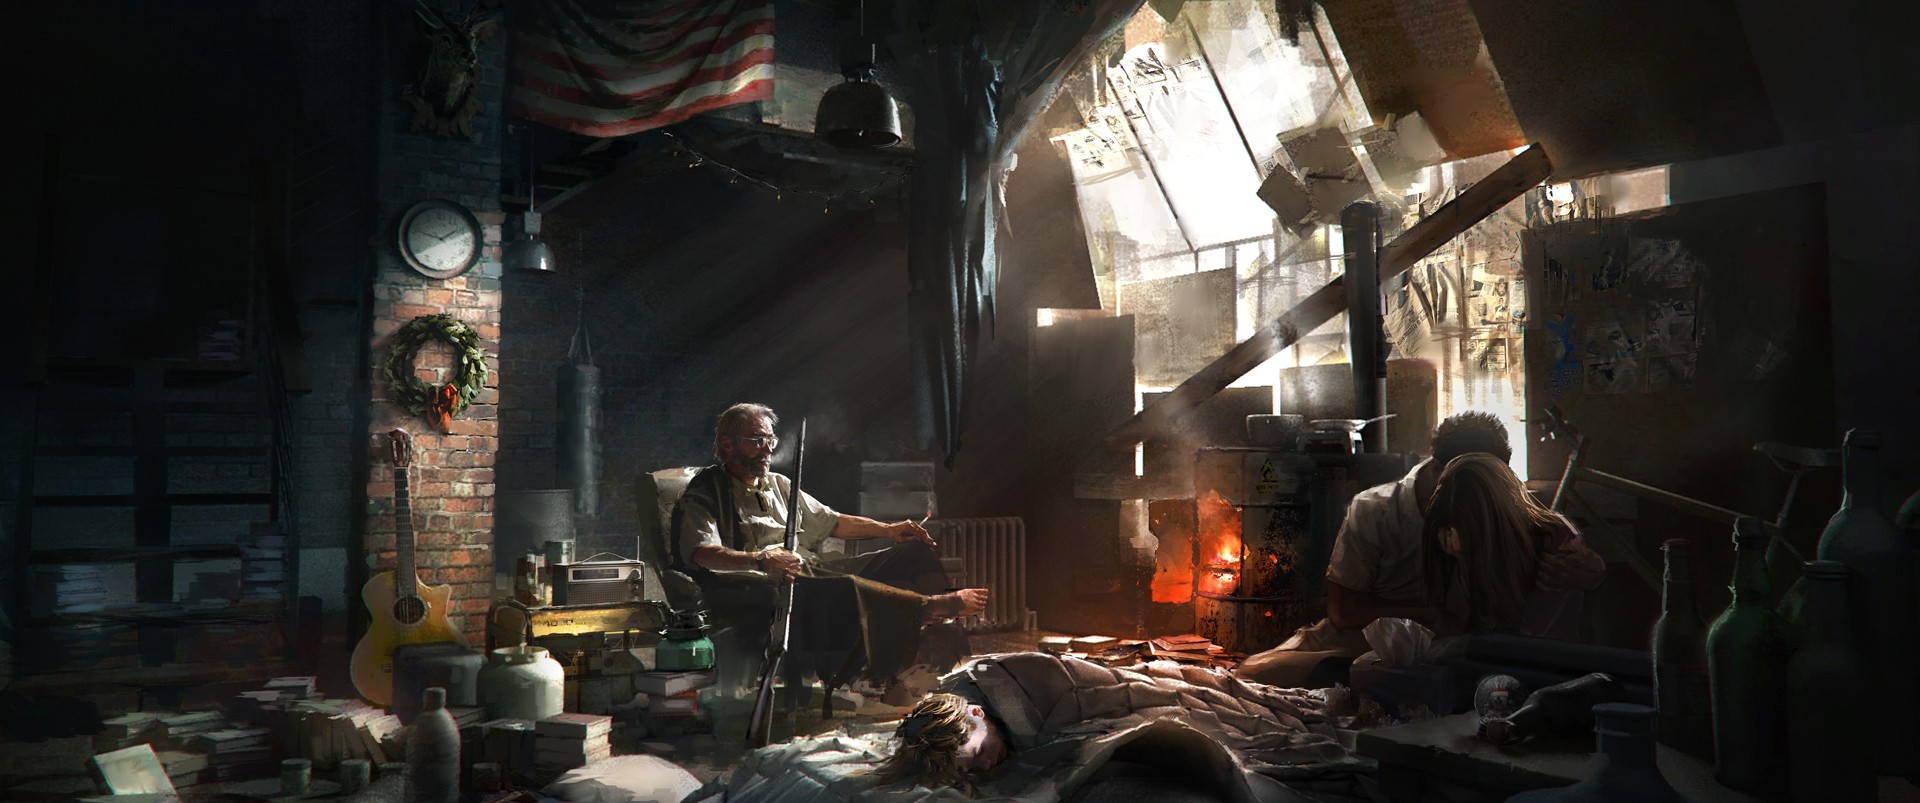 Tom Clancys The Division Computer Game Concept Art 1920x803